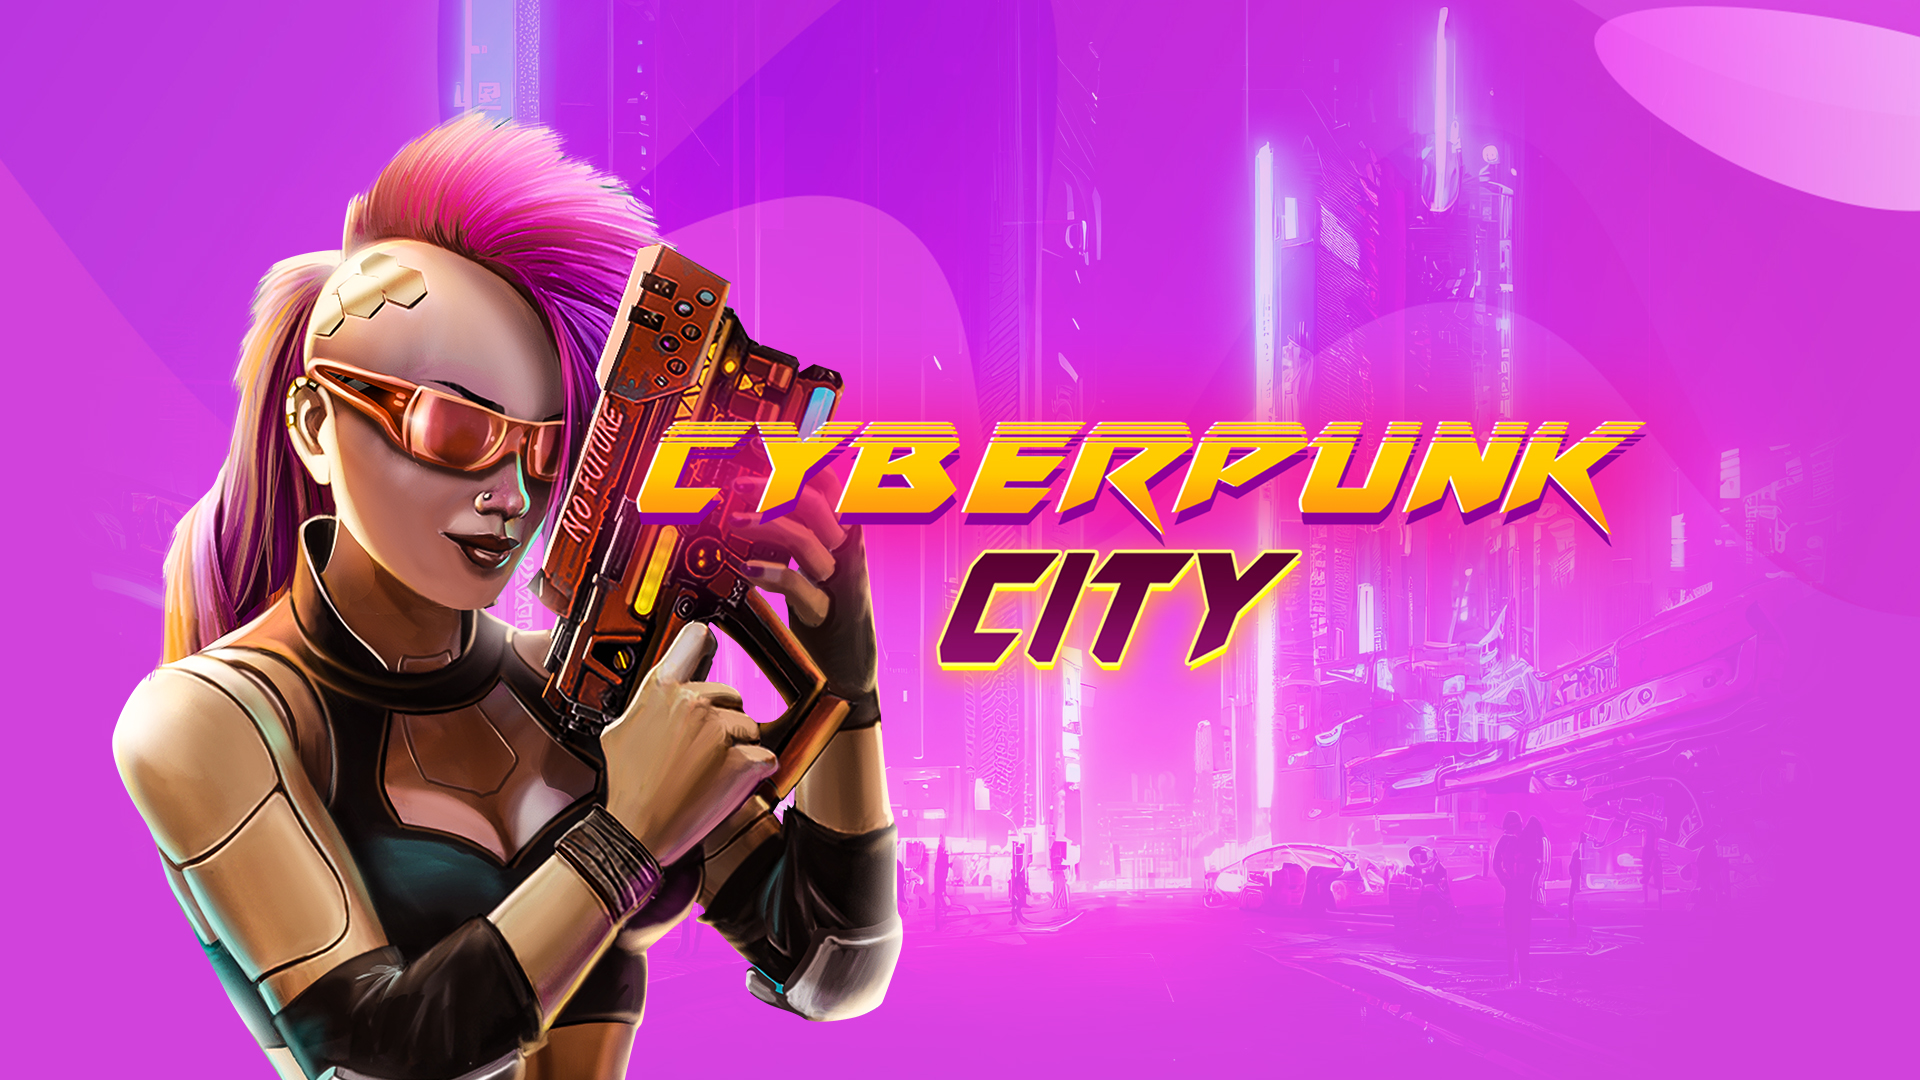 A cyborg with pink hair and a laser gun, who is also the main character from the SlotsLV slots game, Cyberpunk City.